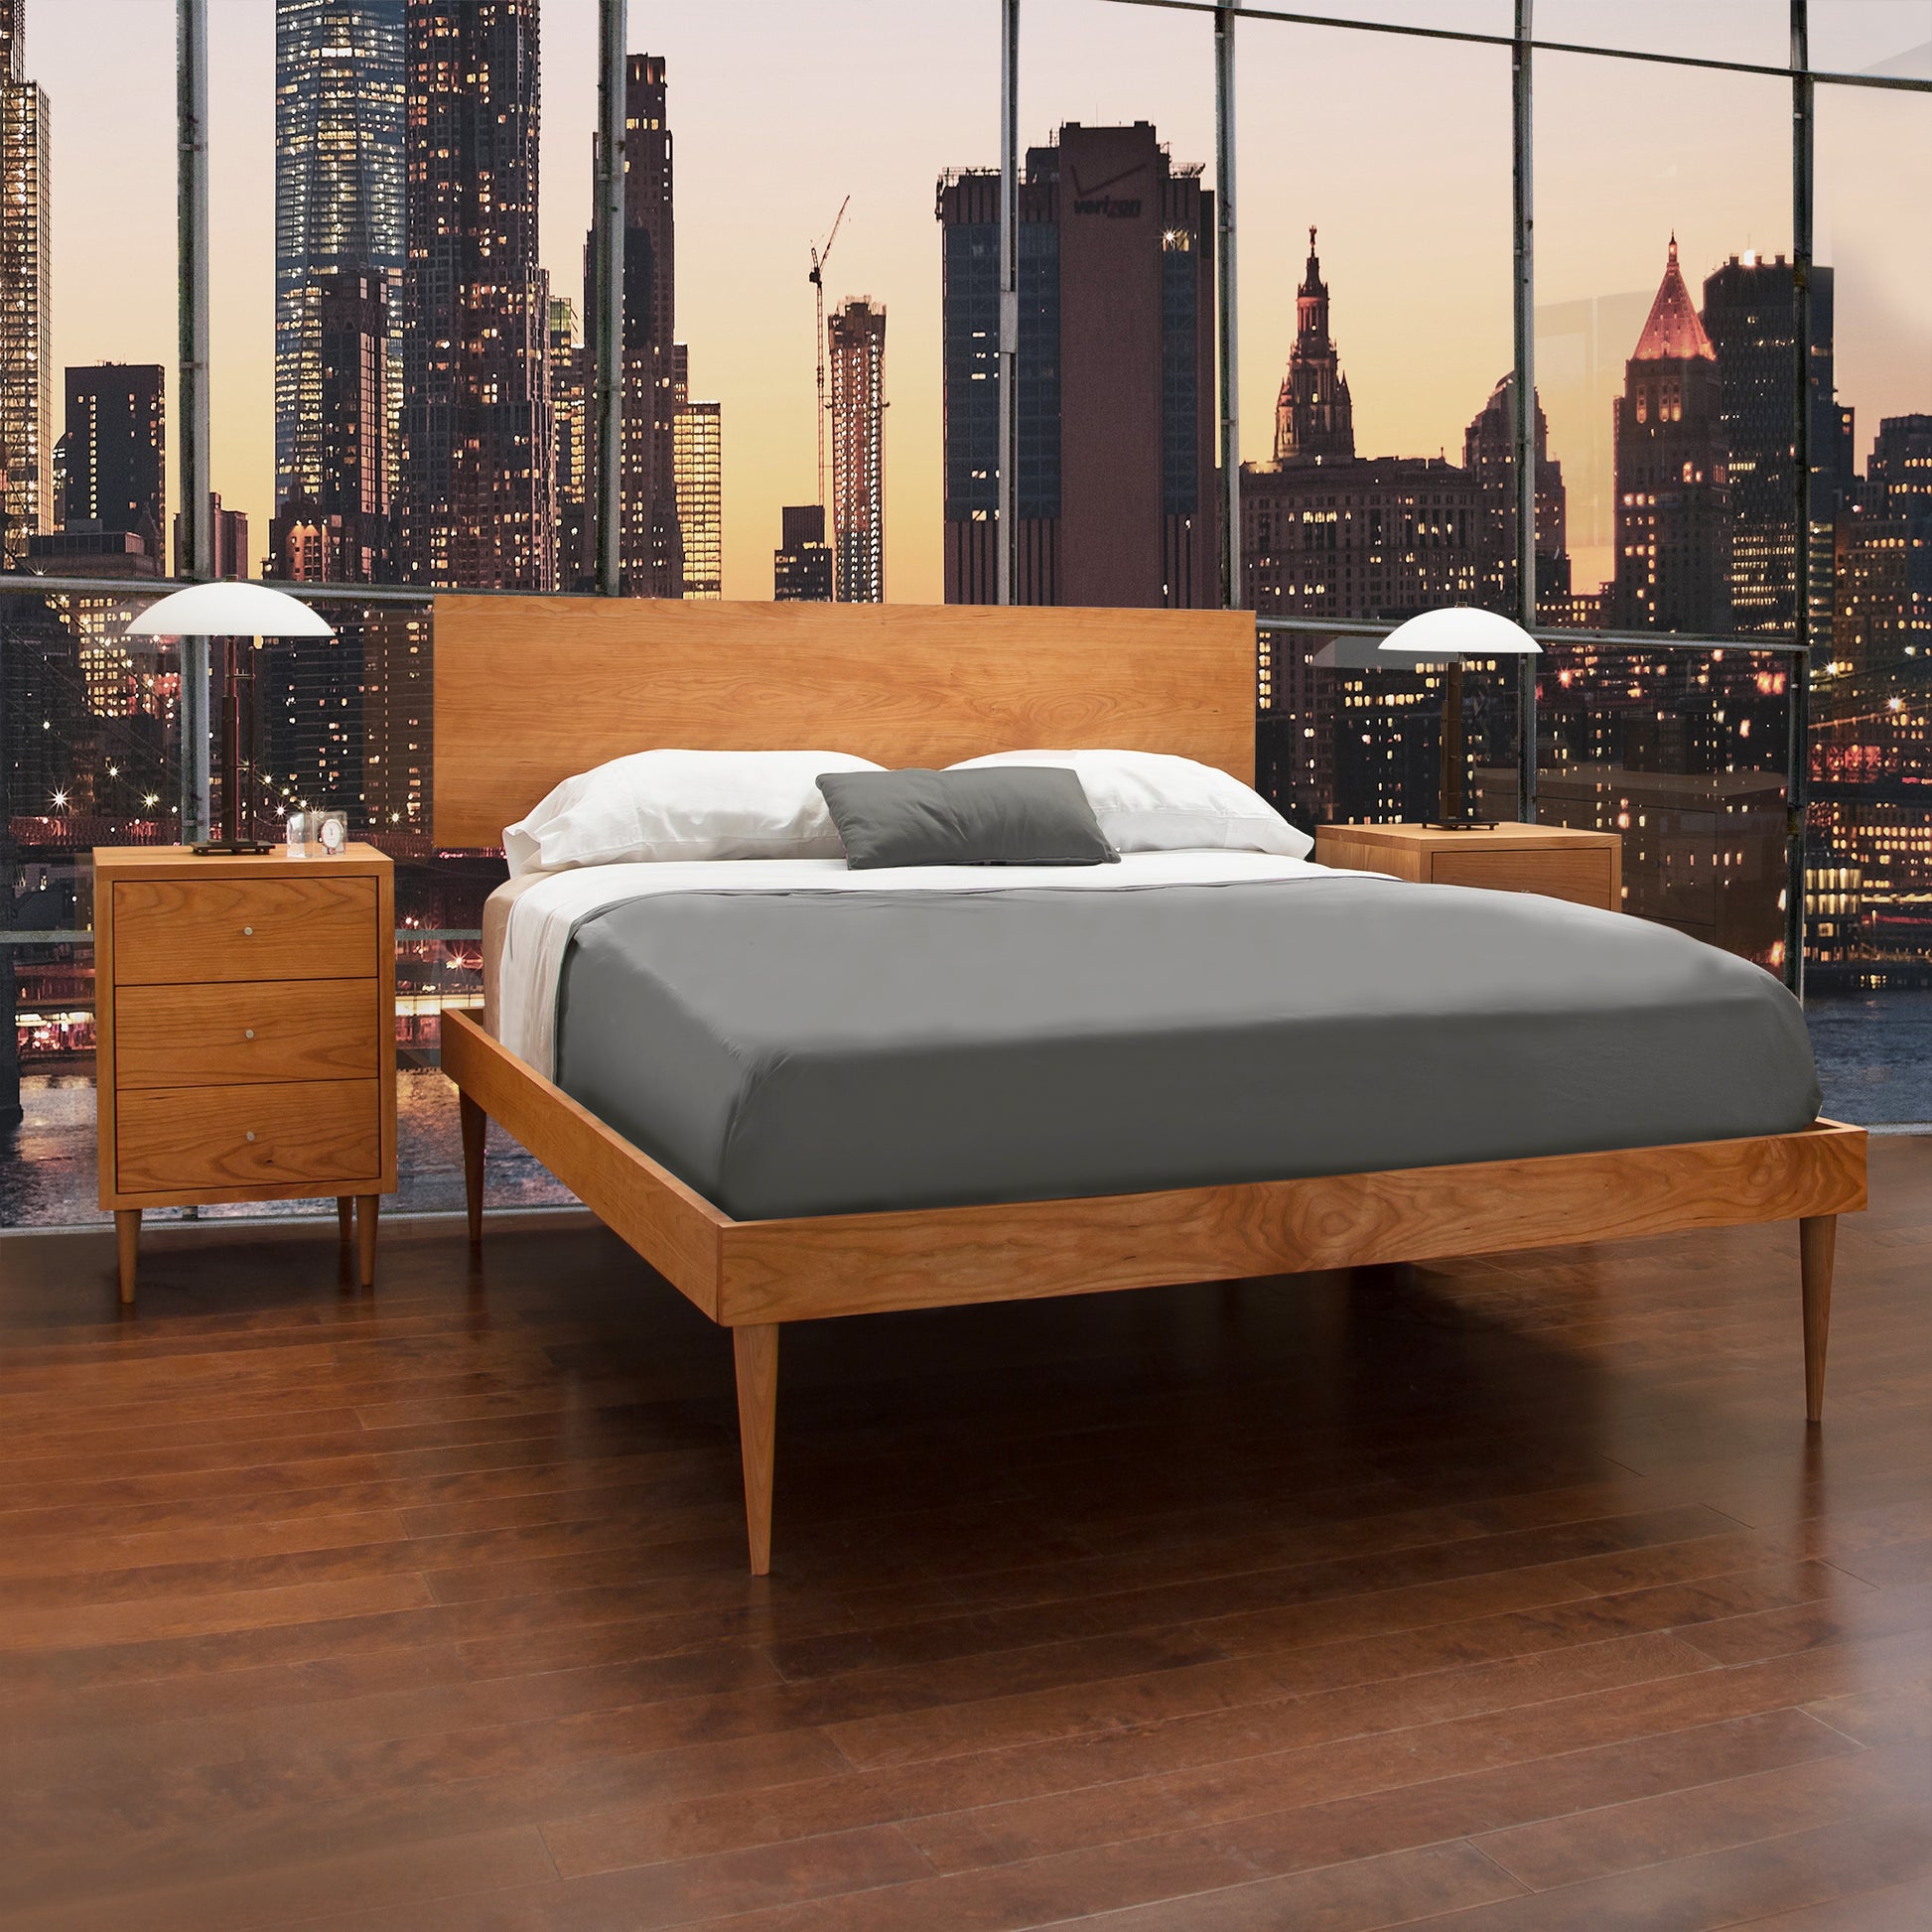 Mid-century modern design natural cherry Vermont Furniture Designs Larssen Bed with white bedding against a large window overlooking a city skyline at dusk.